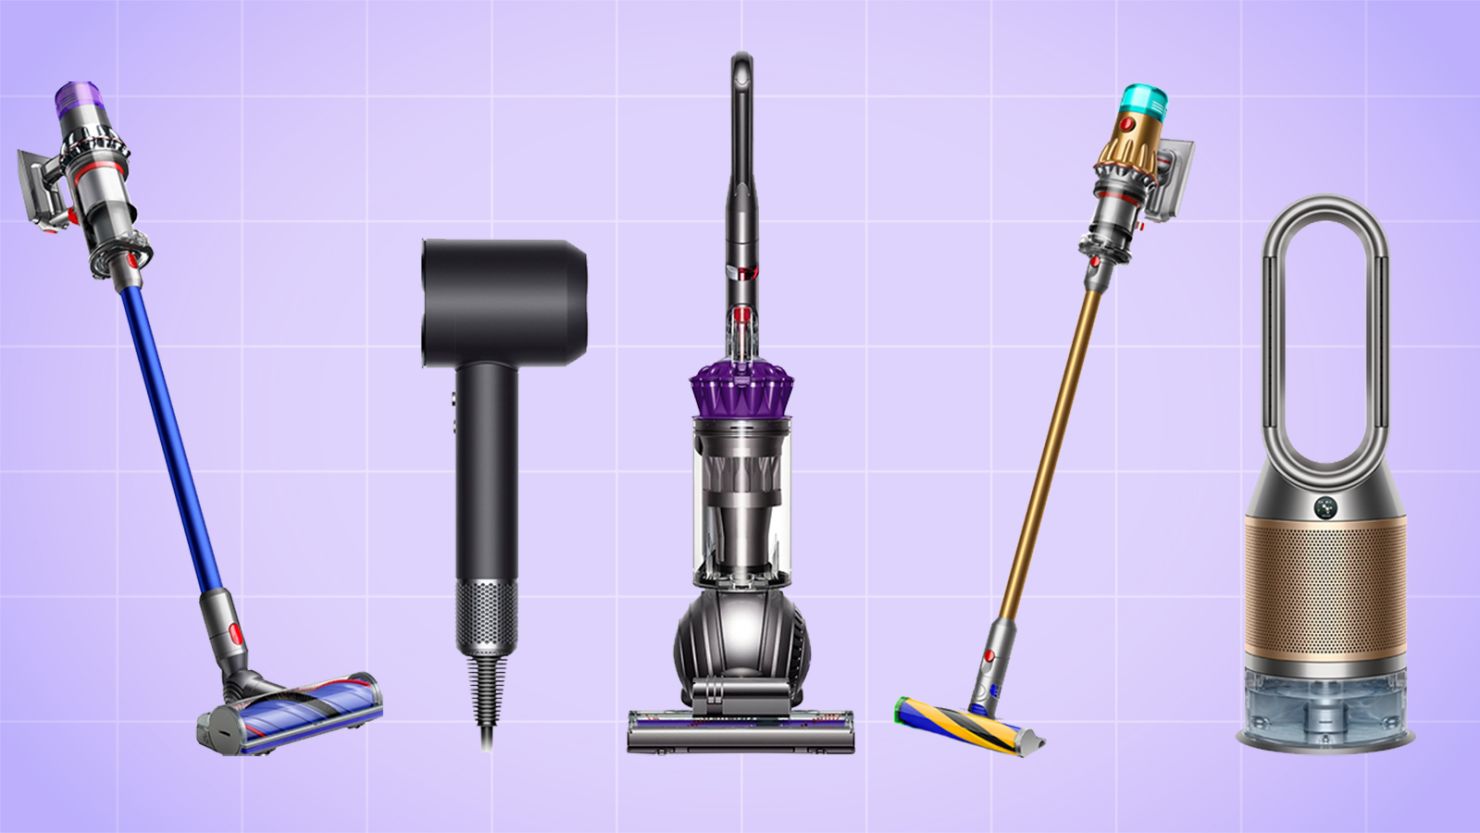 Deal of the Day: Score Dyson's V15 Detect Cordless Vacuum for Just